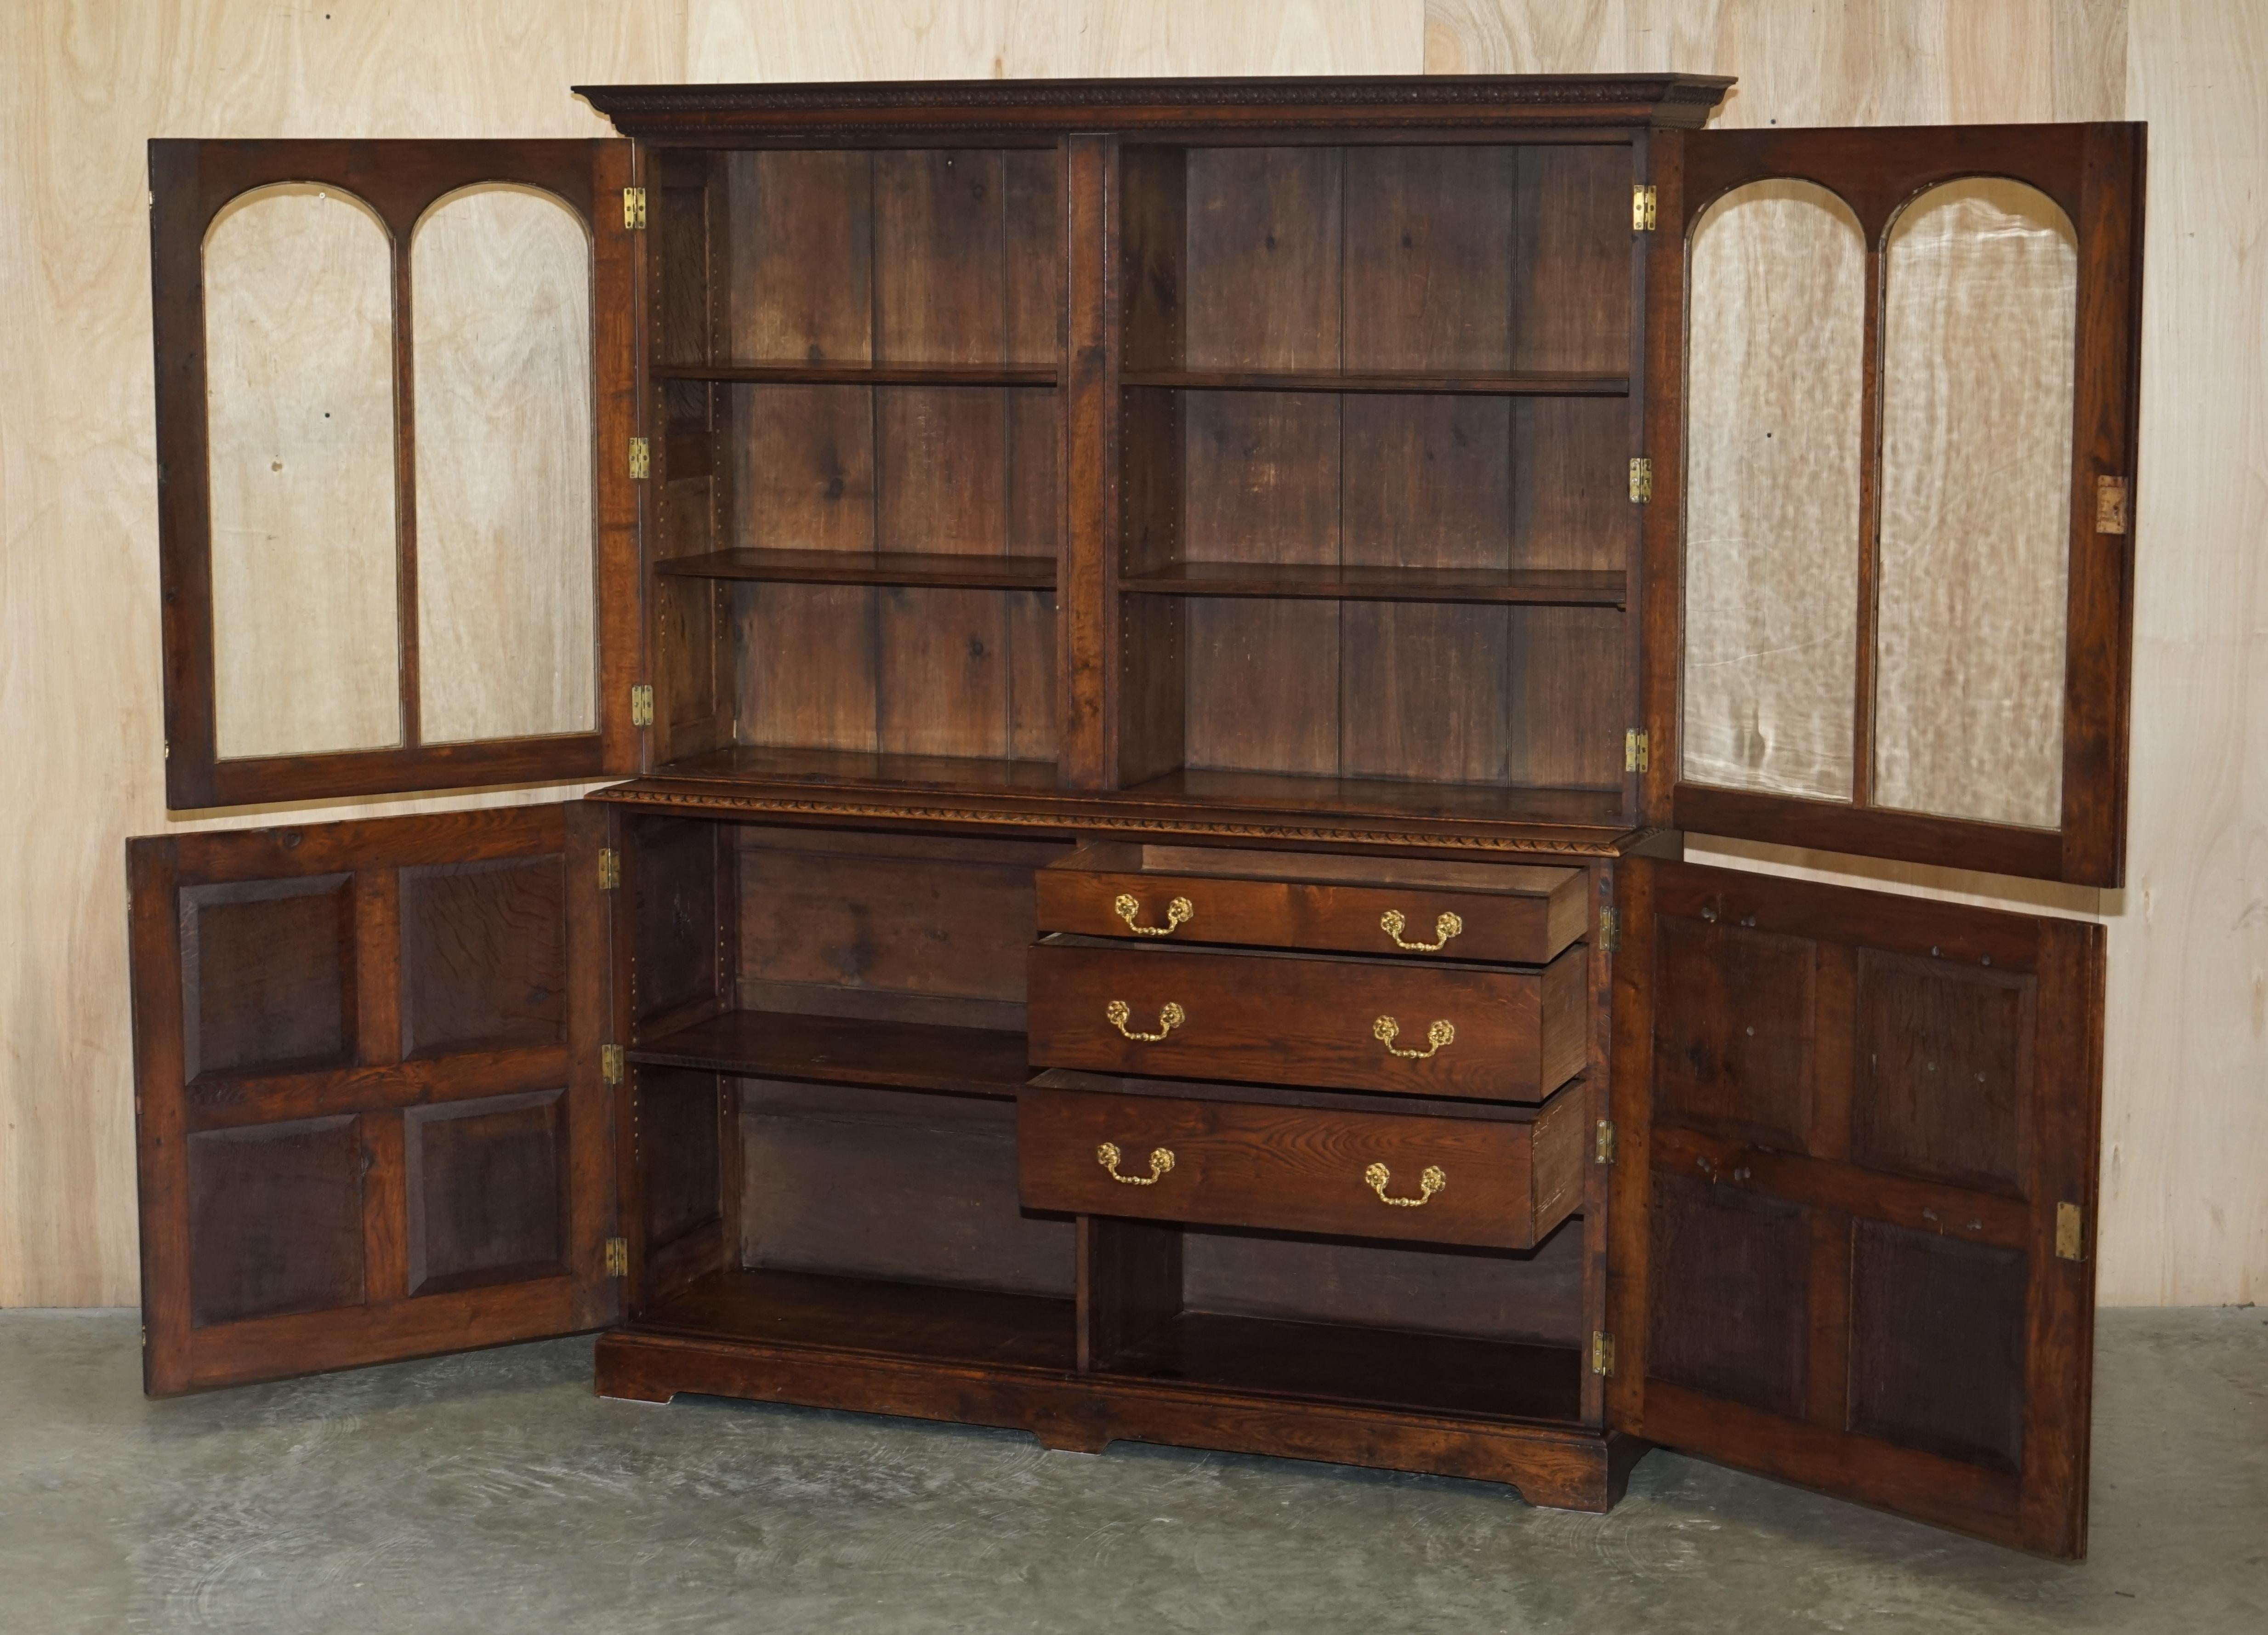 ES BOOKCASE CABiNET FROM THE BATE COLLECTION IN OXFORD UNIVERSITY im Angebot 10